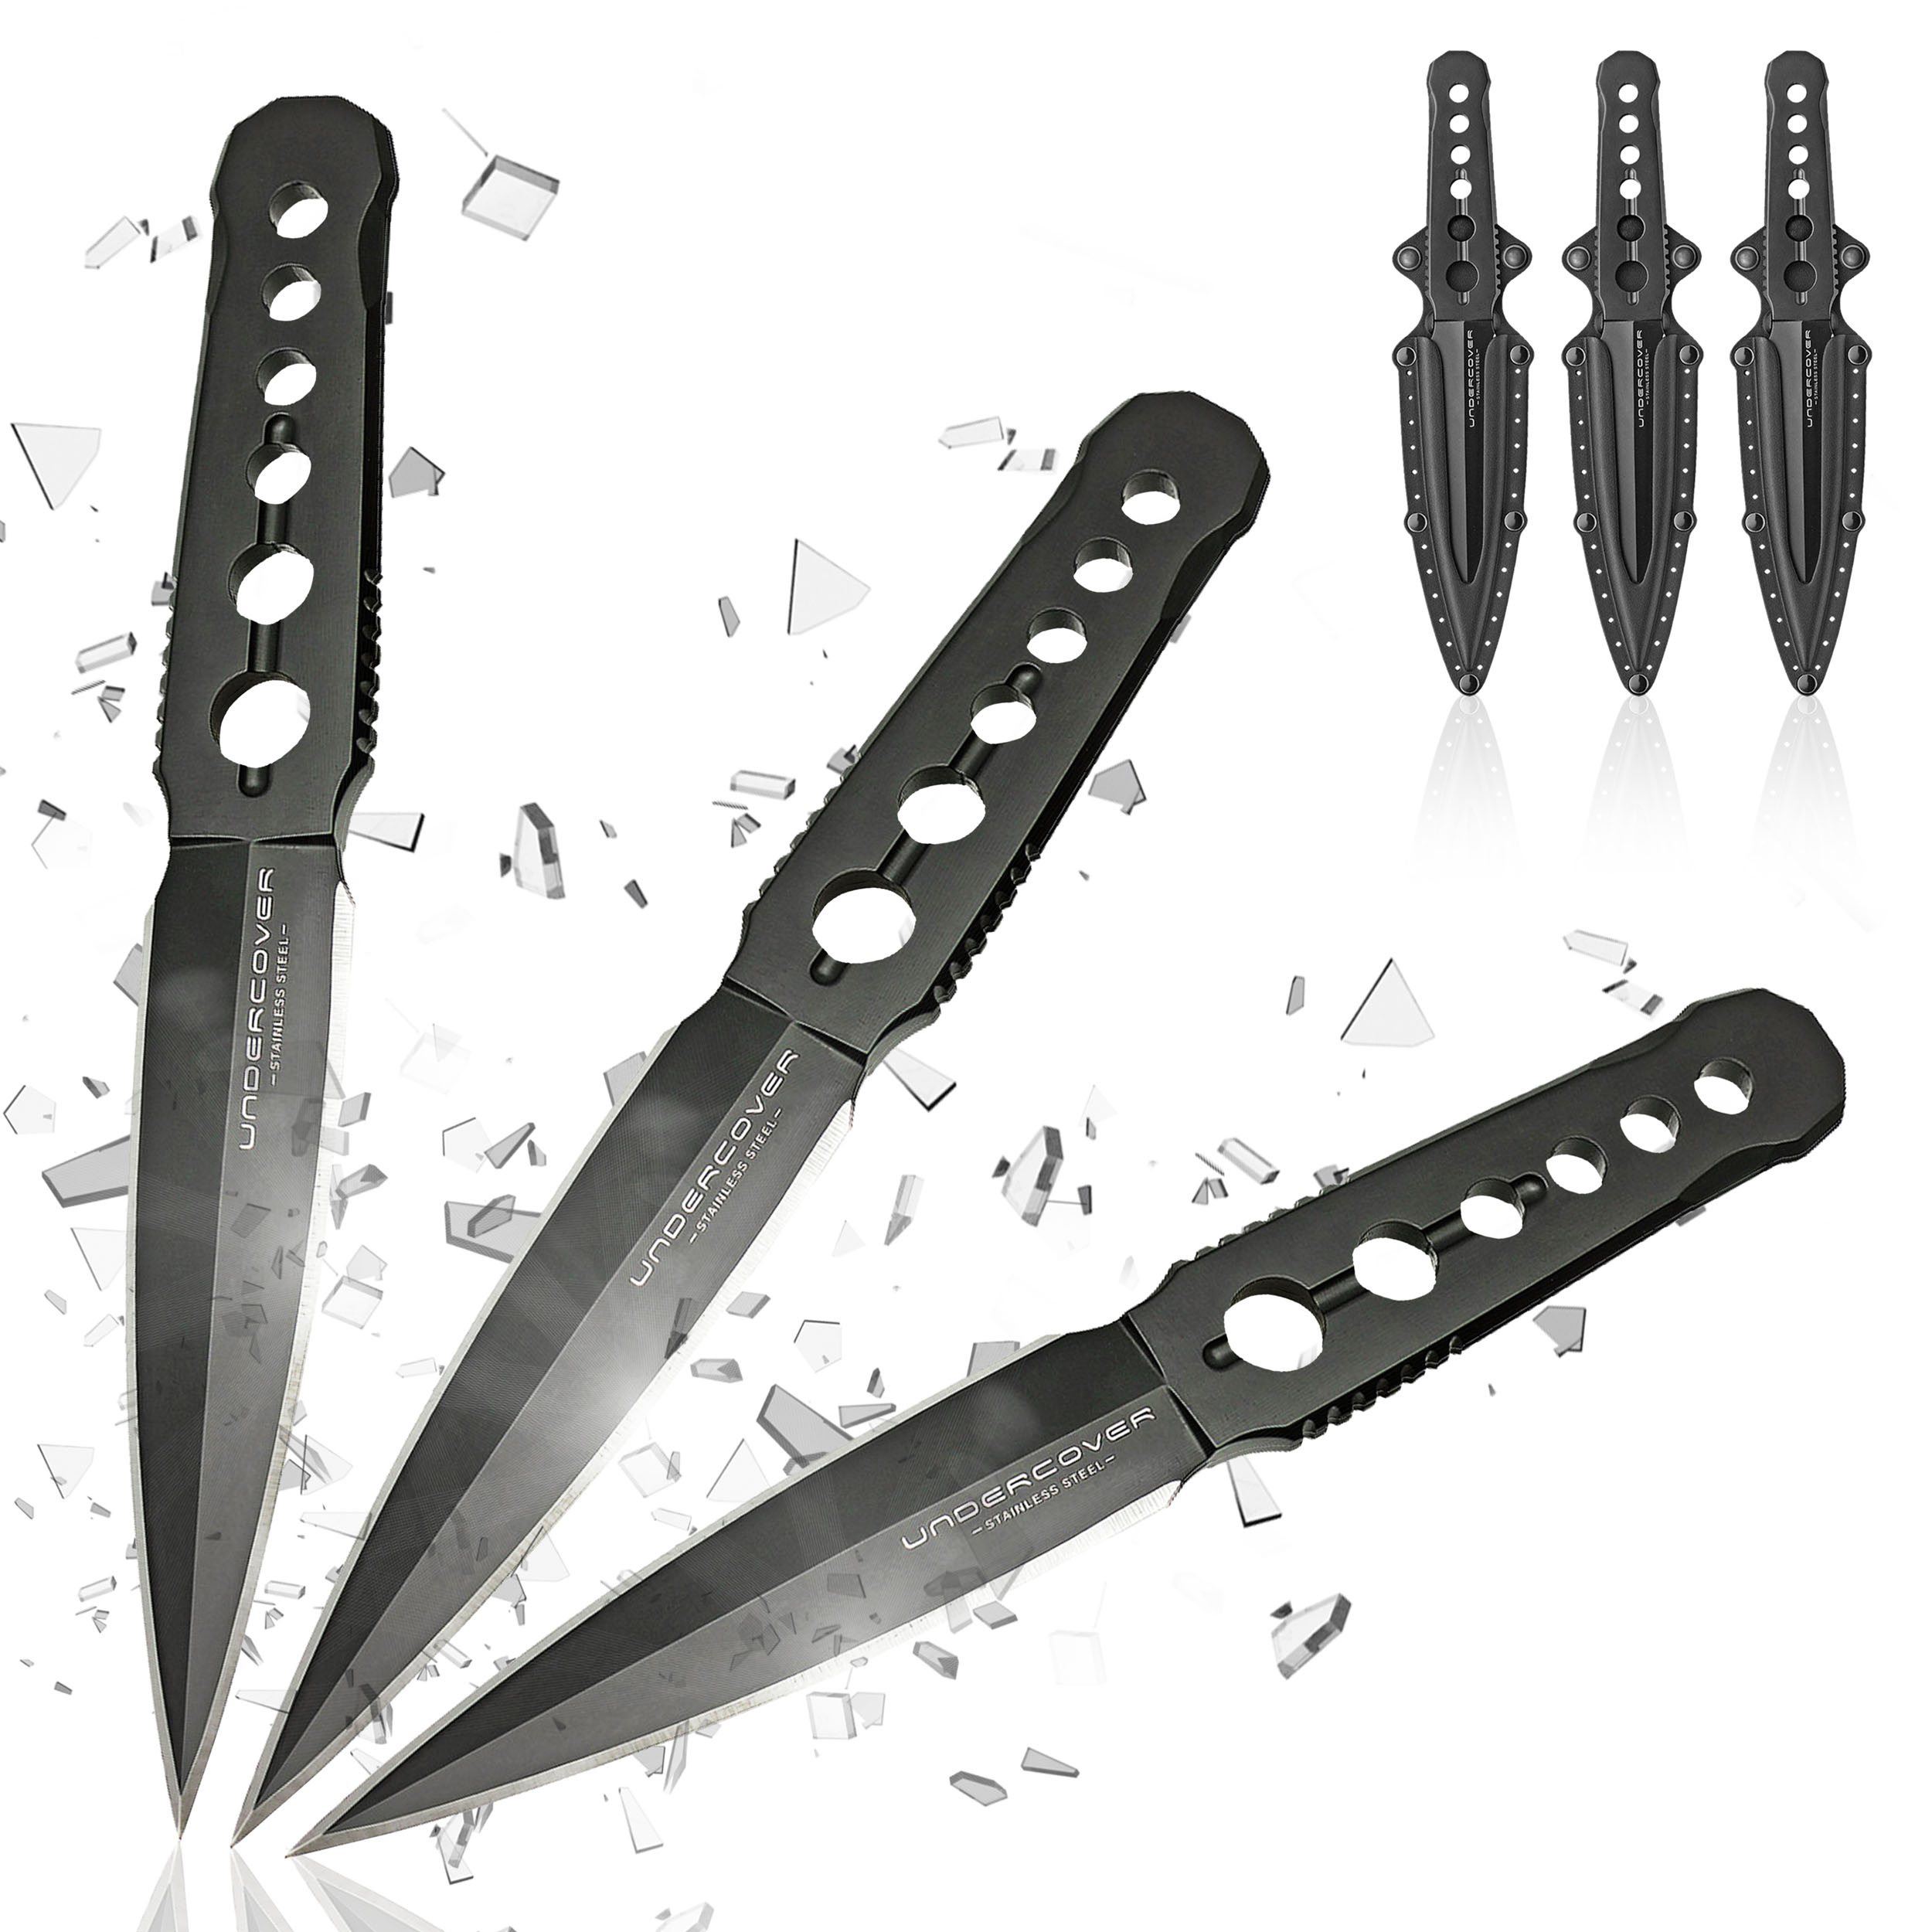 Three Undercover CIA Stinger Knives with Sheath Bundle